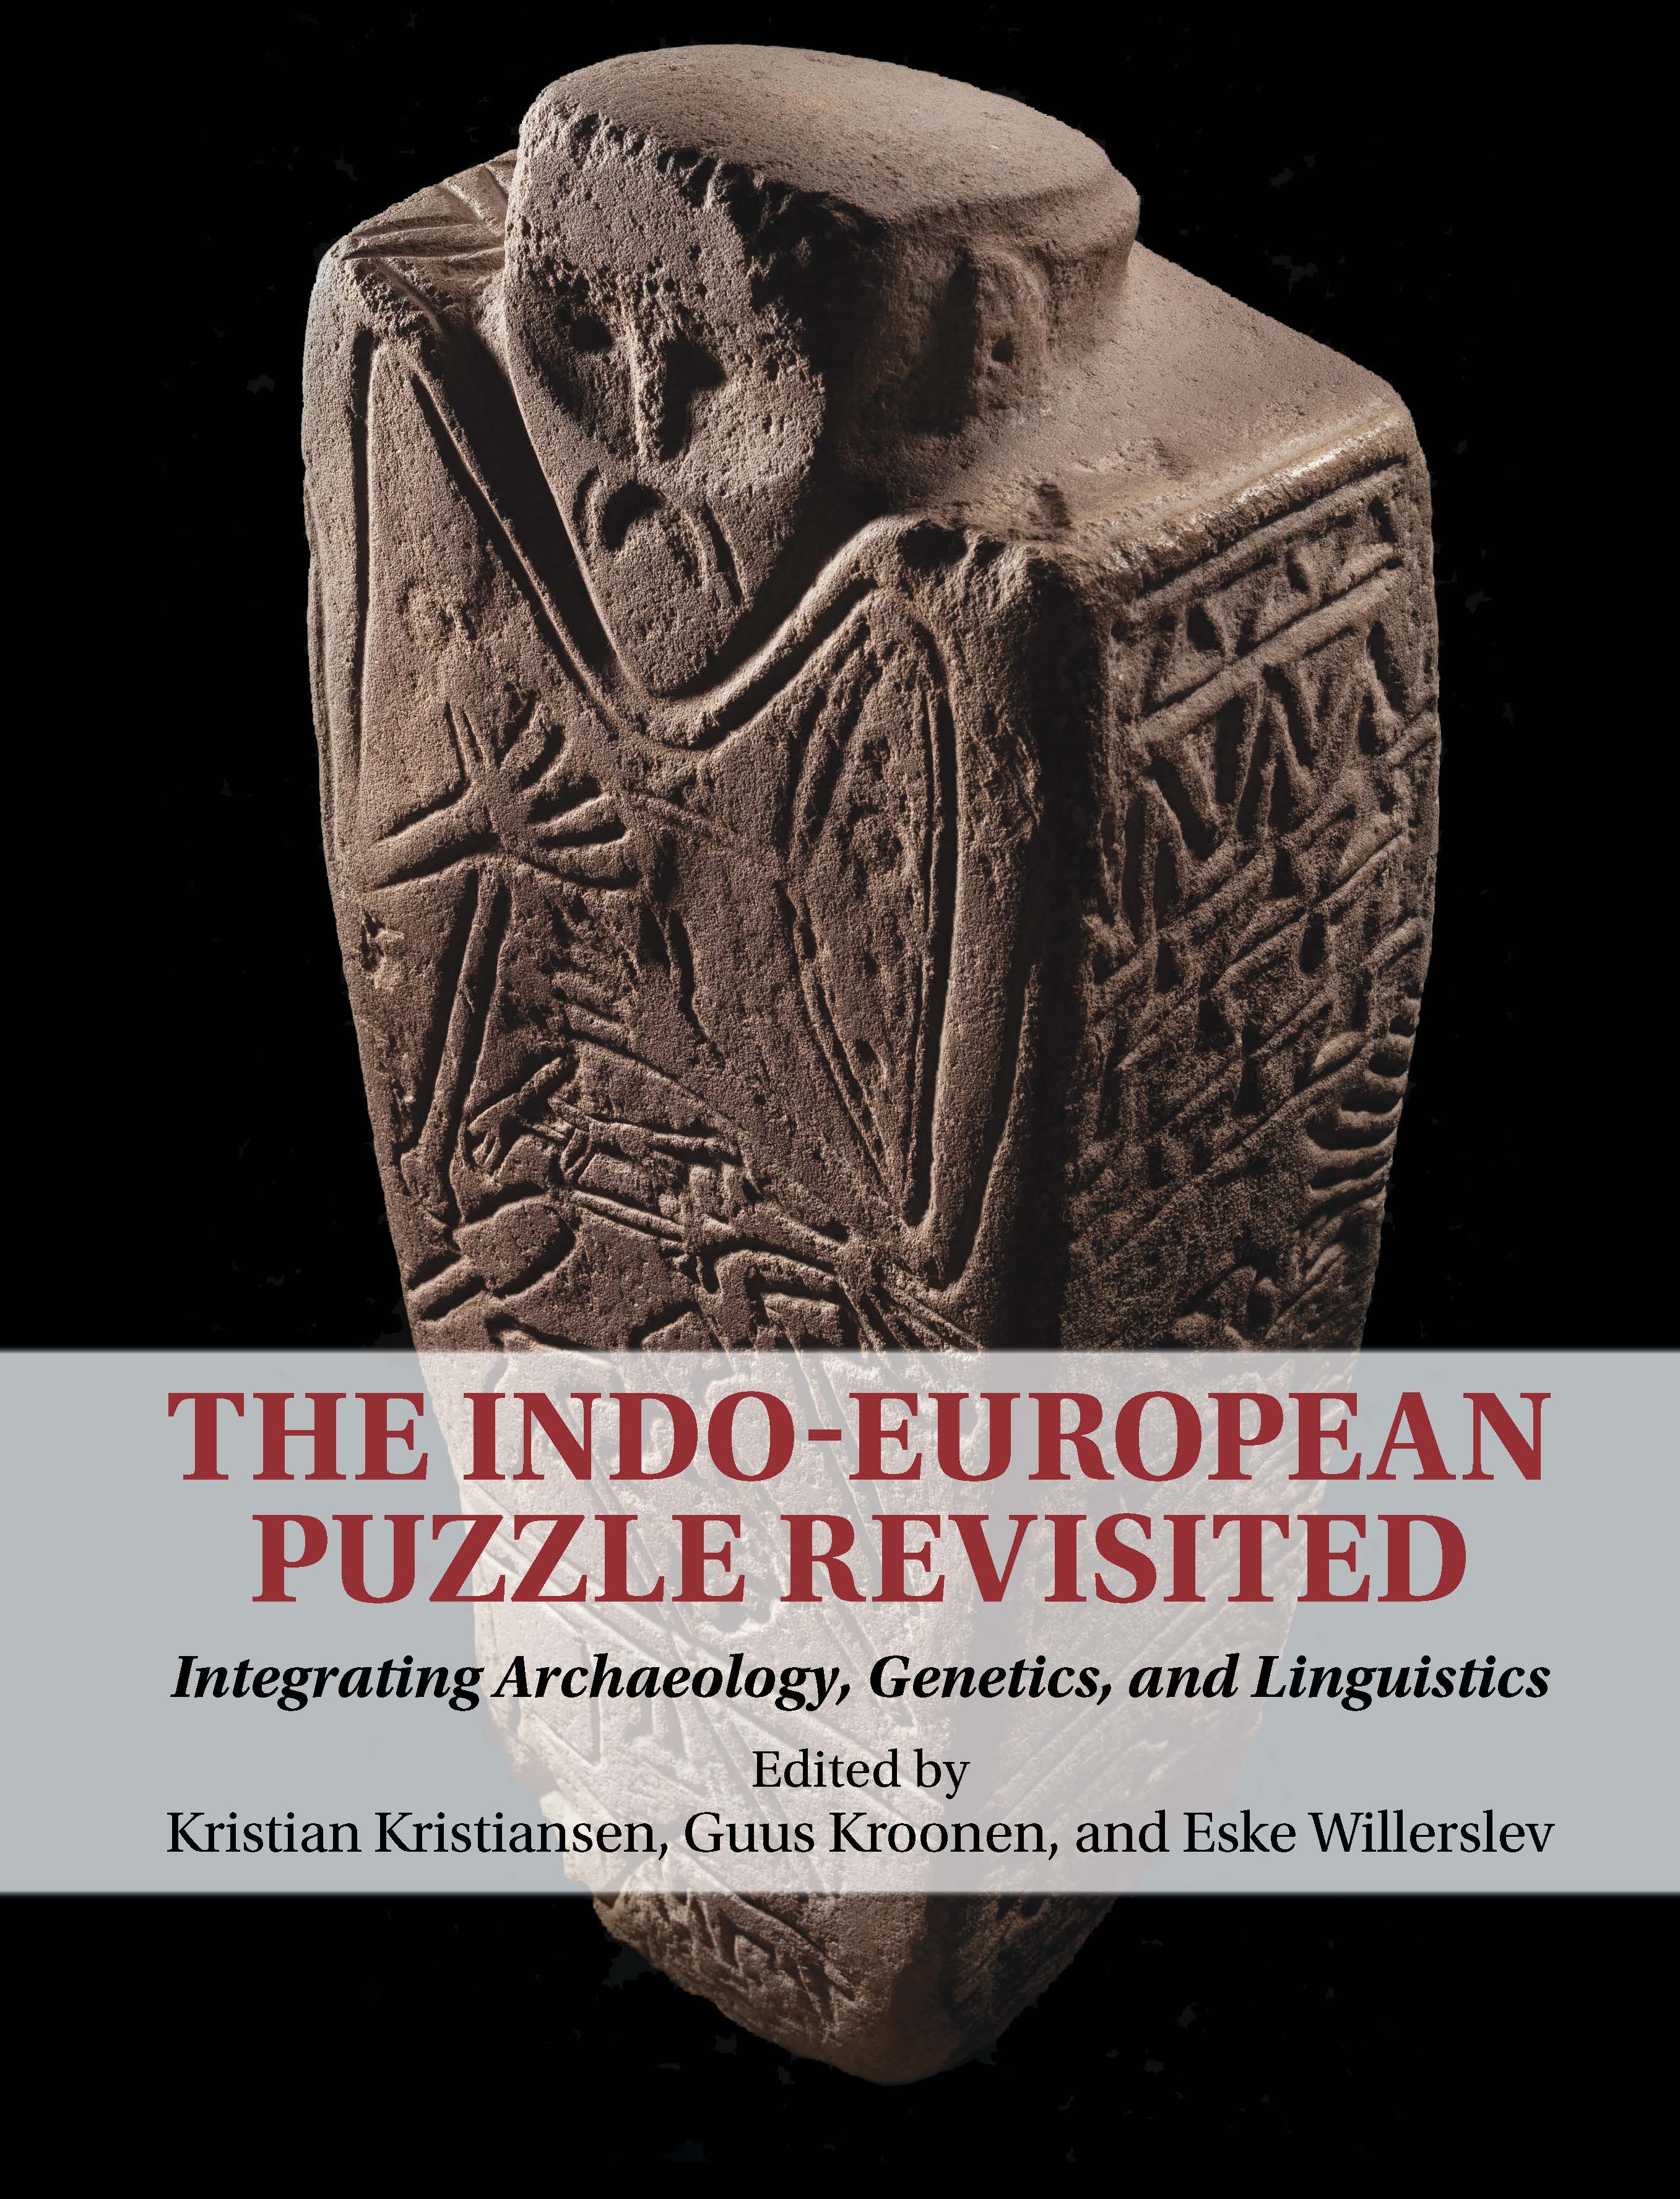 Front page of the book. Black background with an anthropomorphic stele.